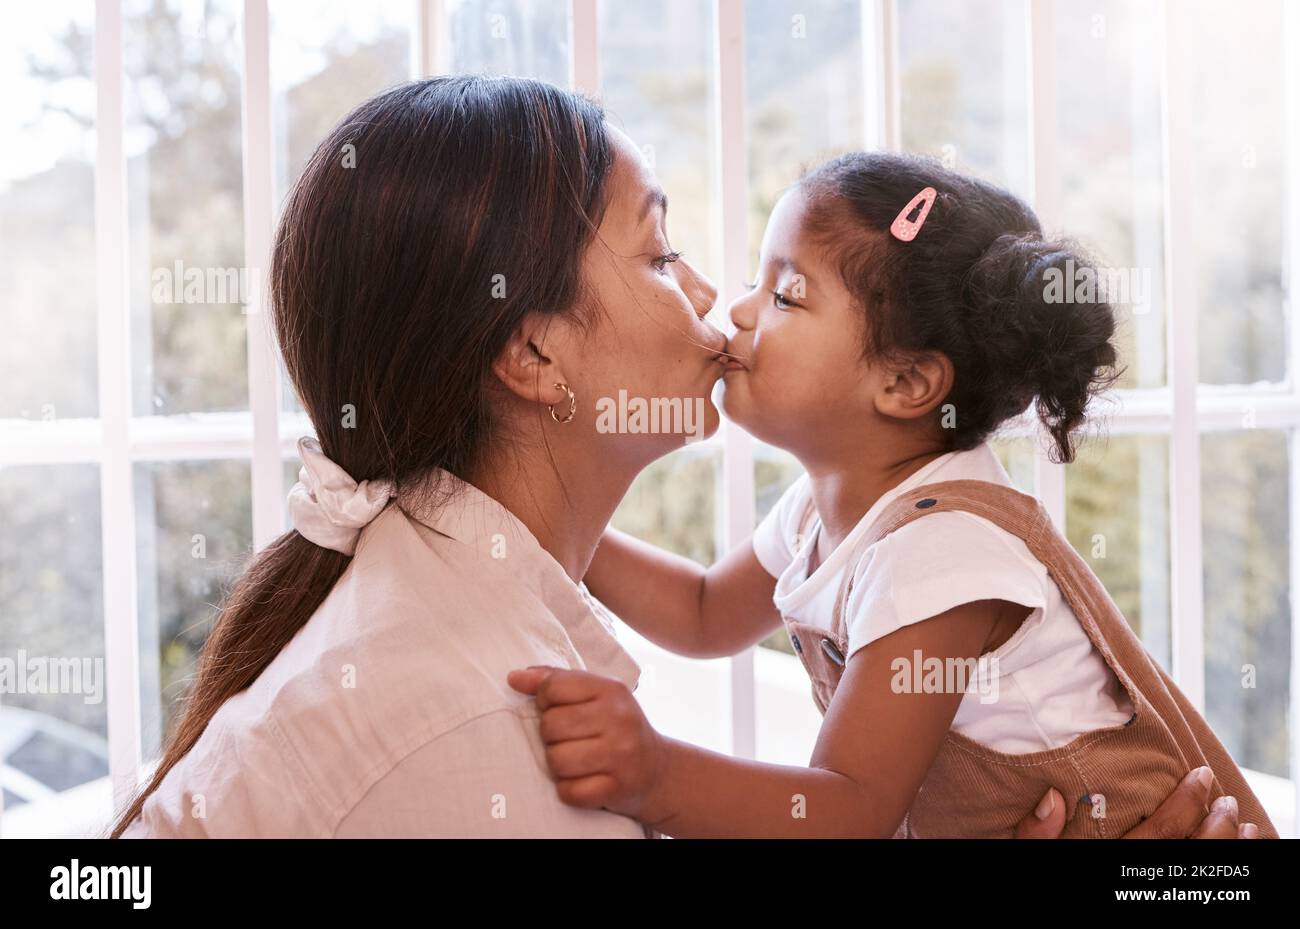 Kisses for my good girl. Shot of a young mother giving her daughter a kiss at home. Stock Photo